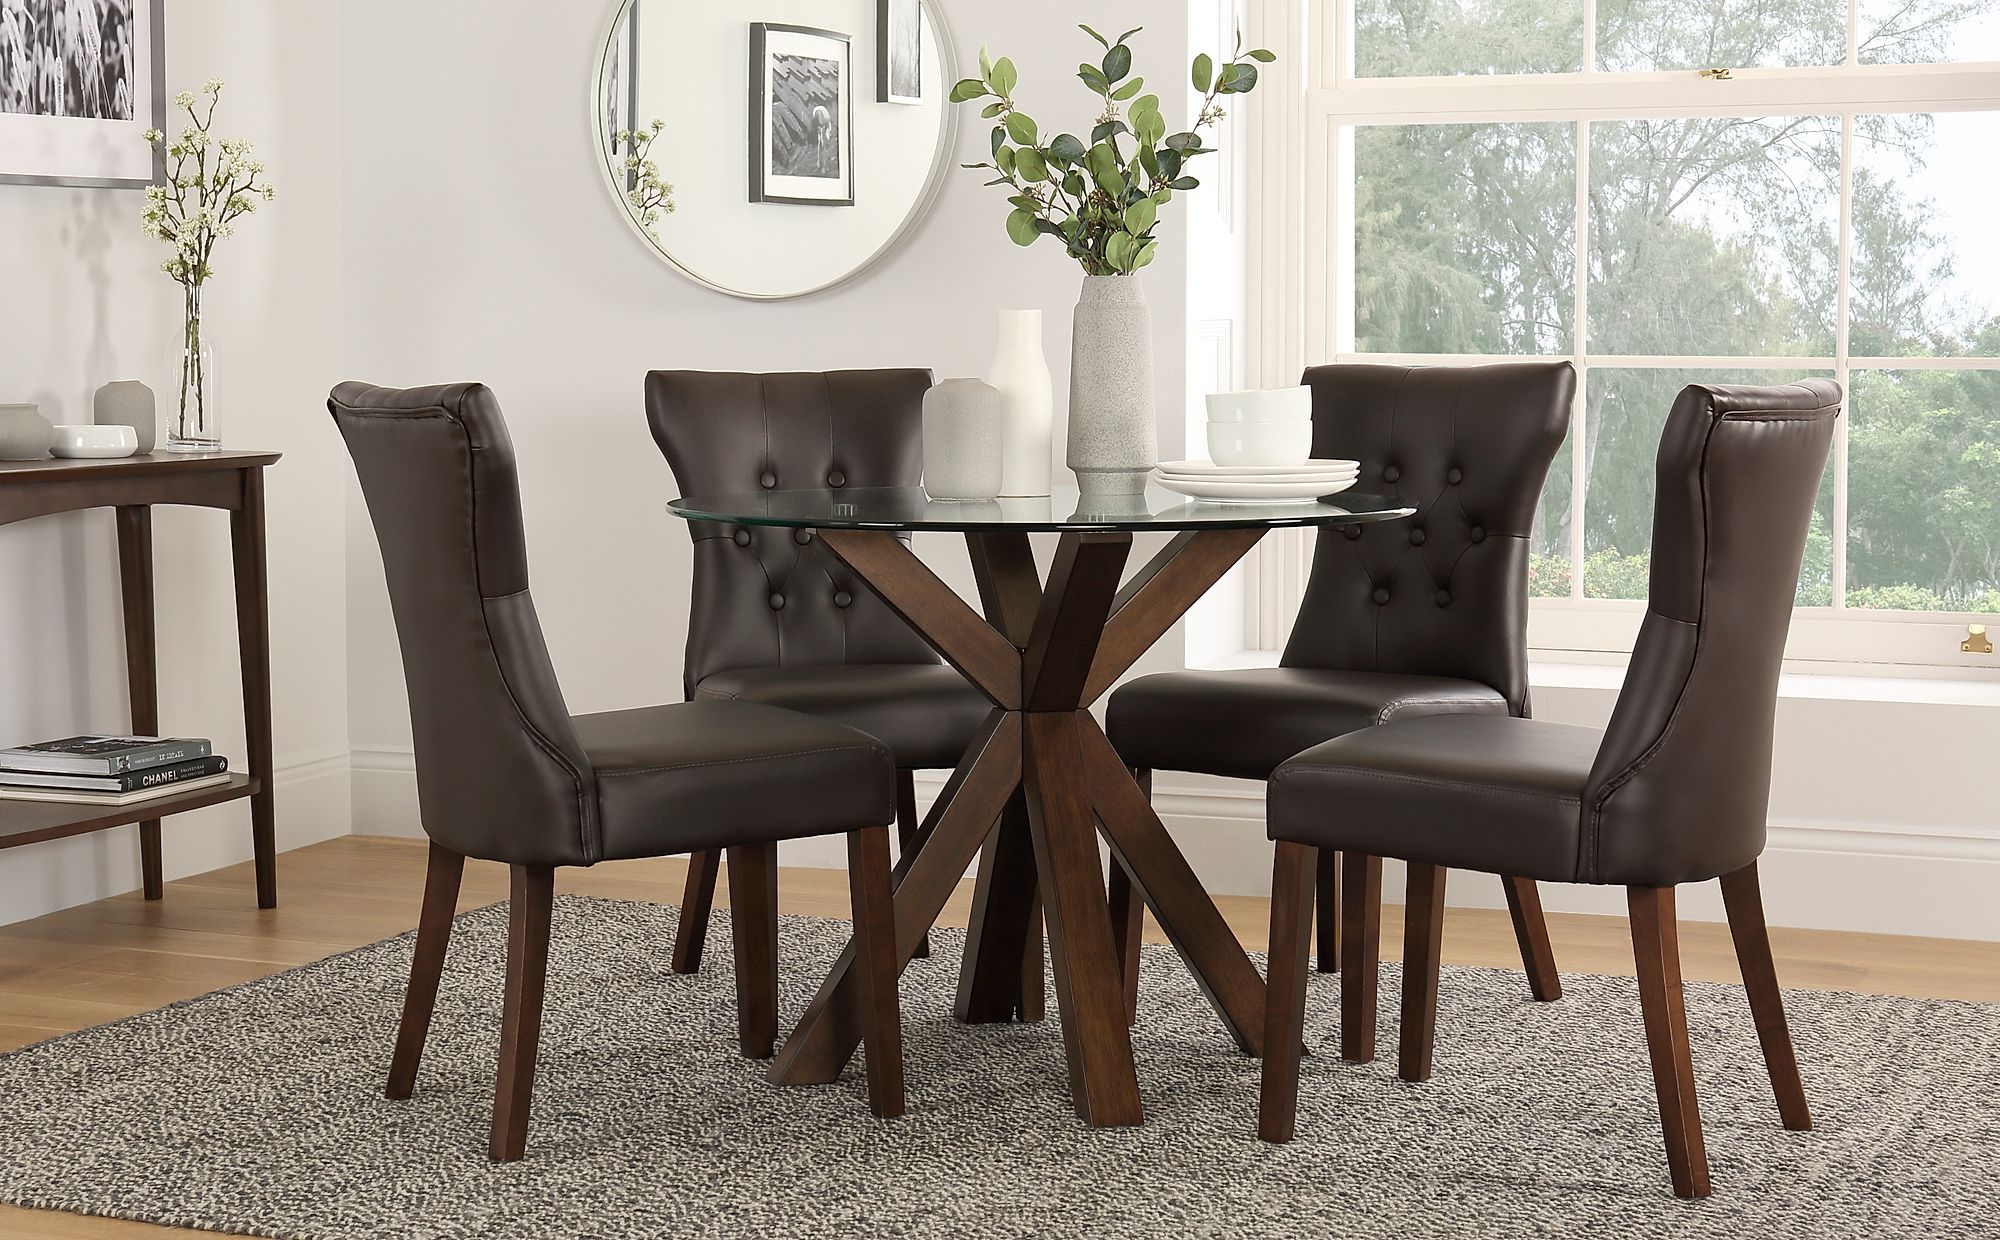 brown chair for kitchen table